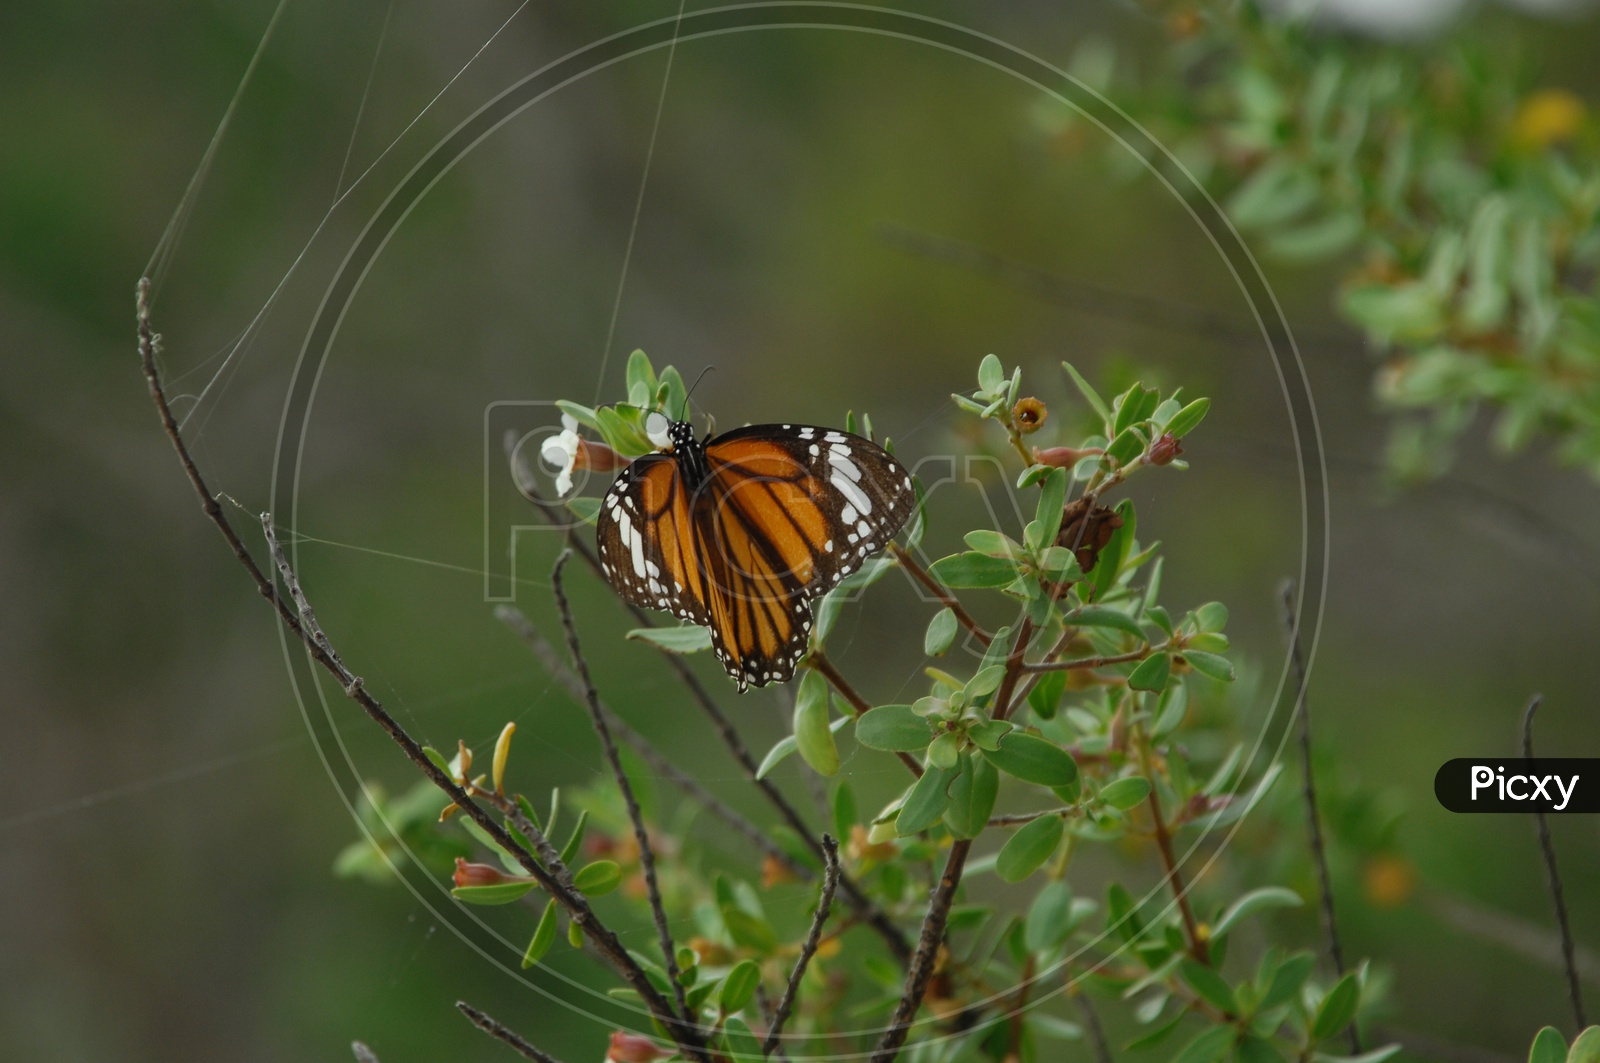 Monarch butterfly on a plant